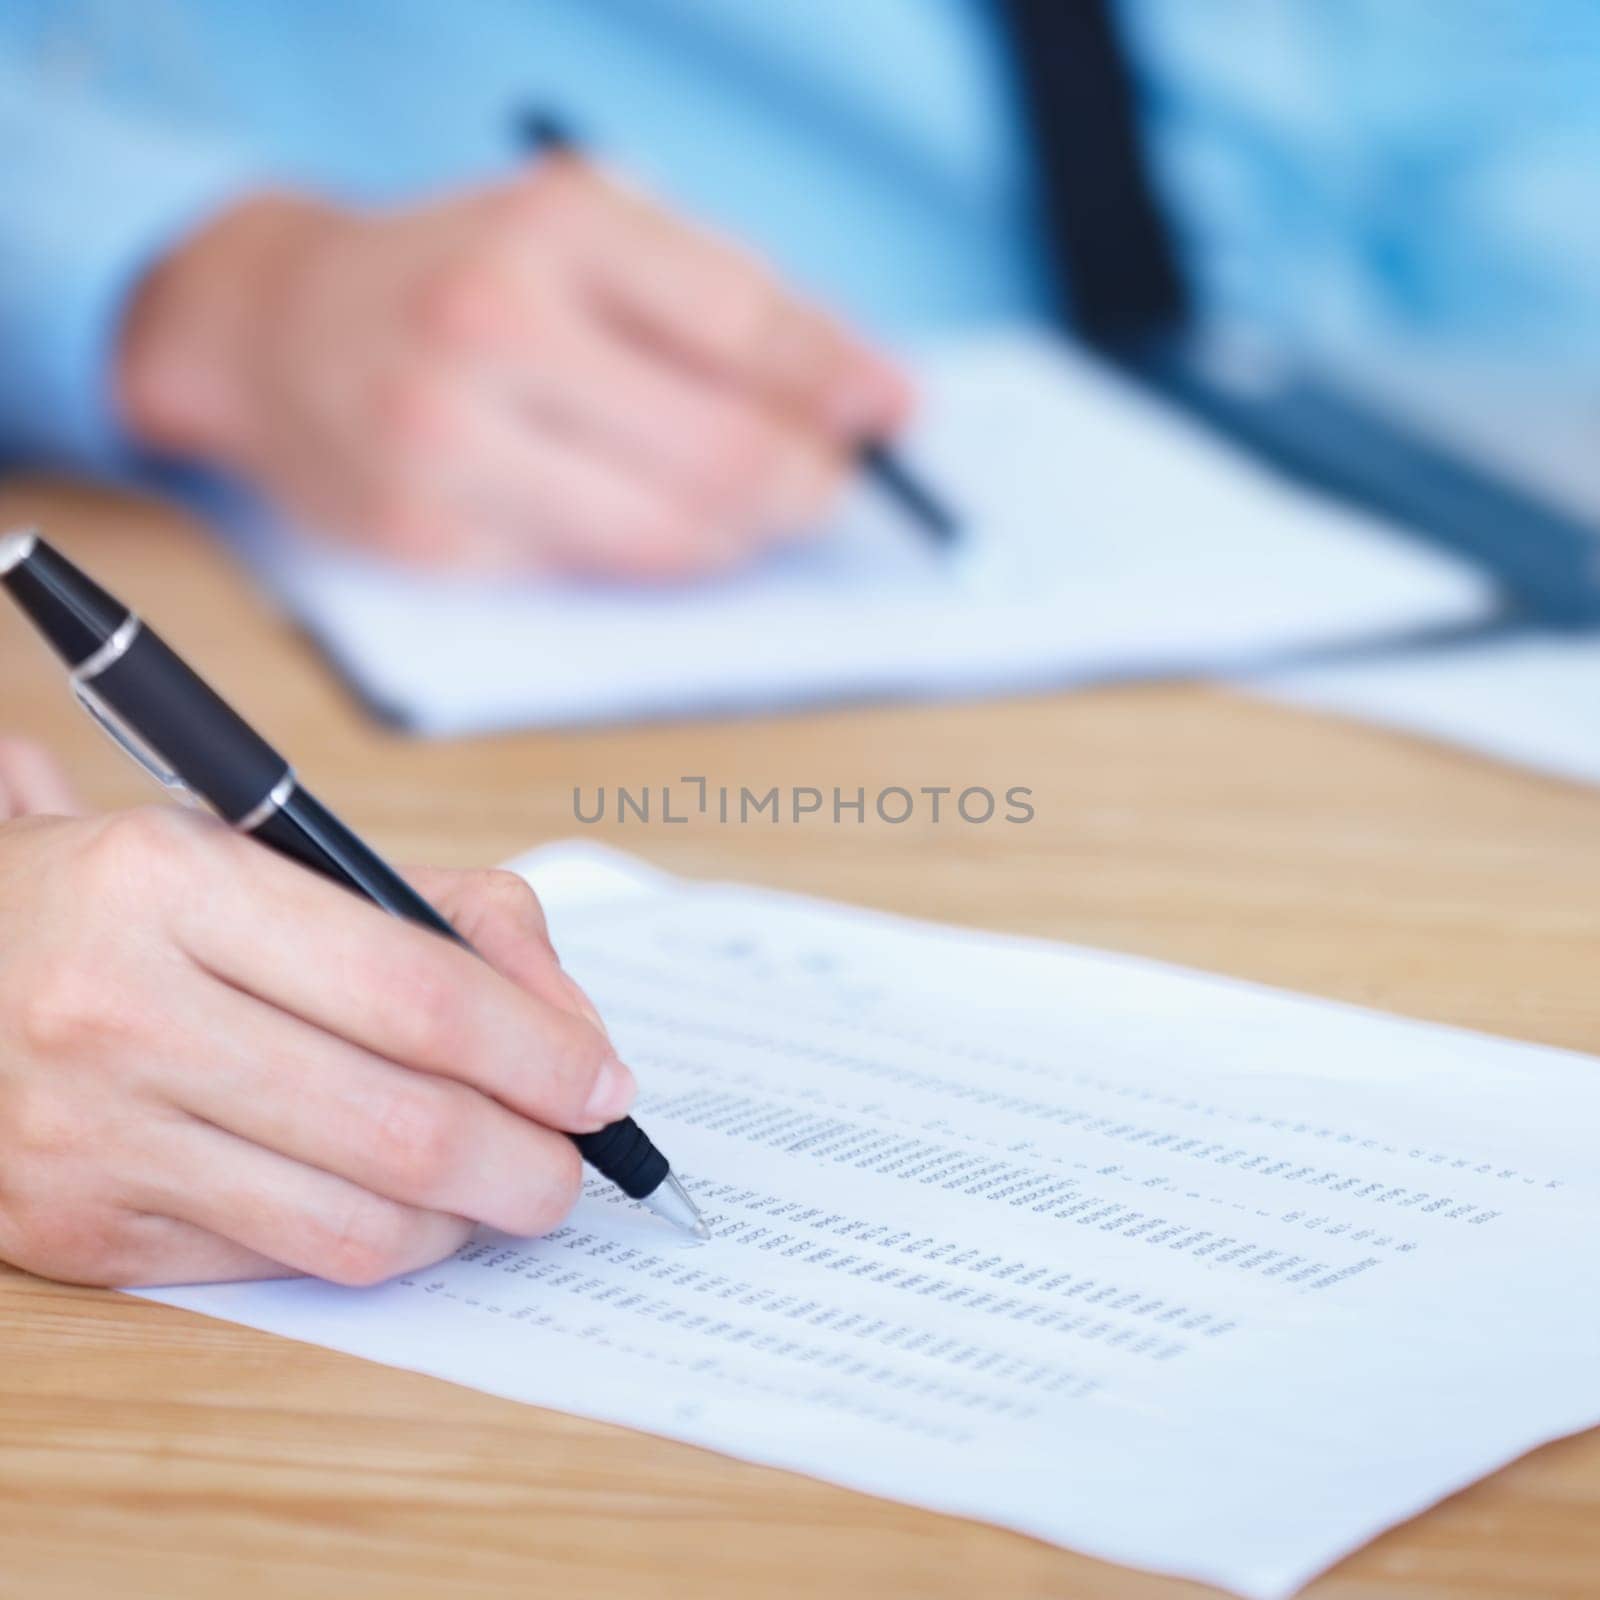 Business people, hands and writing on finance spreadsheet for accounting, budget or expenses on form. Hand of accountants working on financial report, documents or paperwork with pen on office desk.